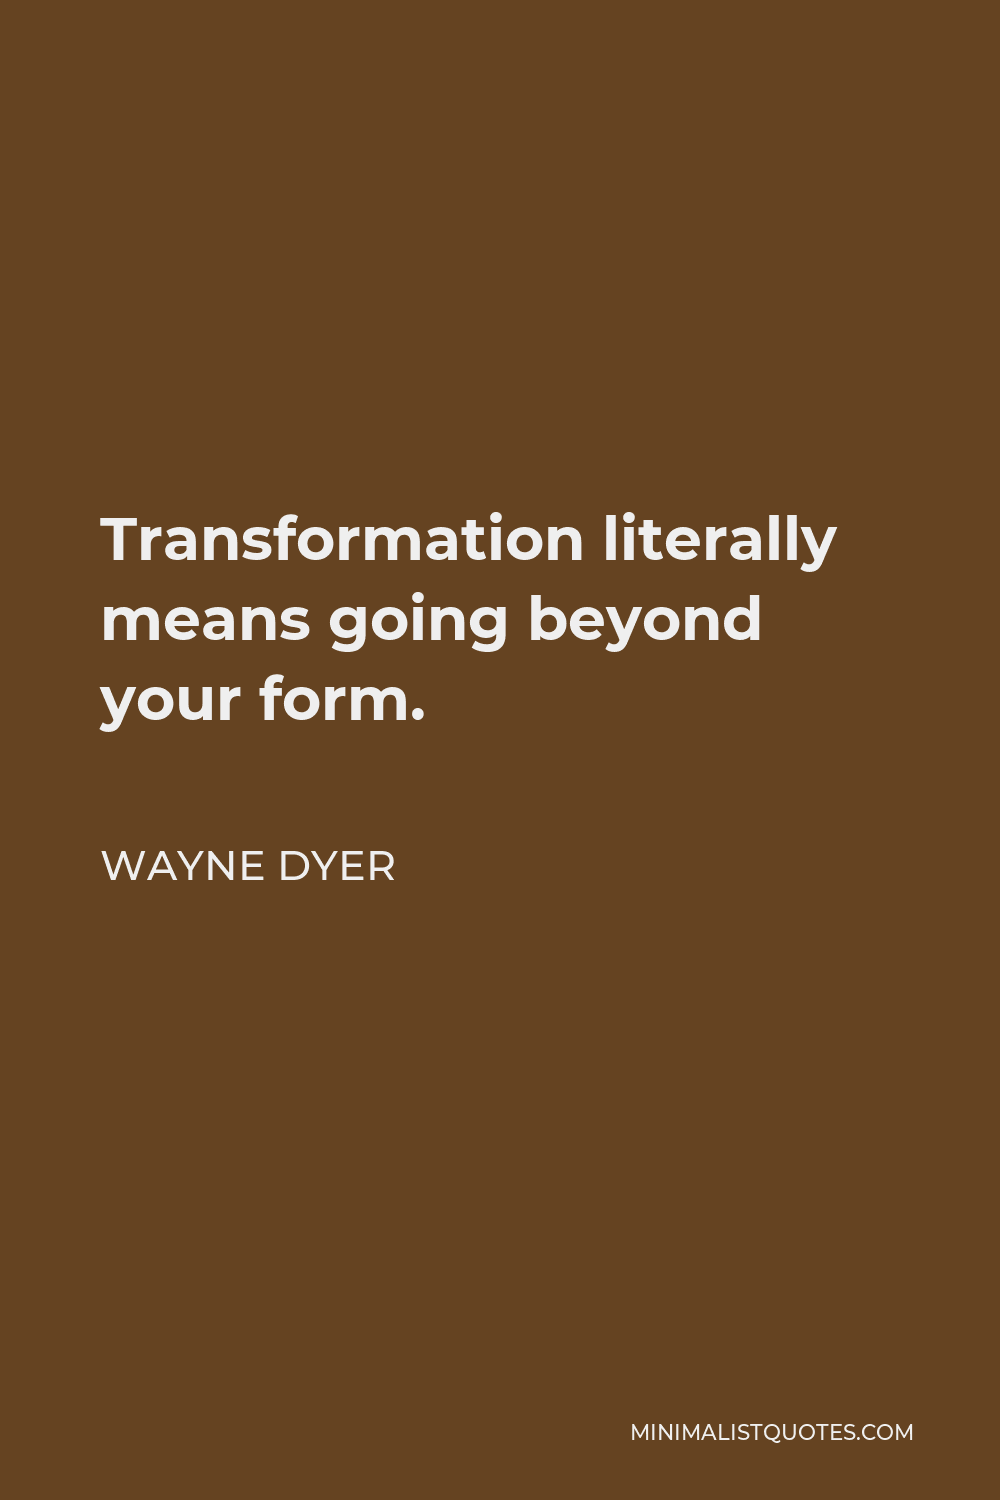 Wayne Dyer Quote - Transformation literally means going beyond your form.